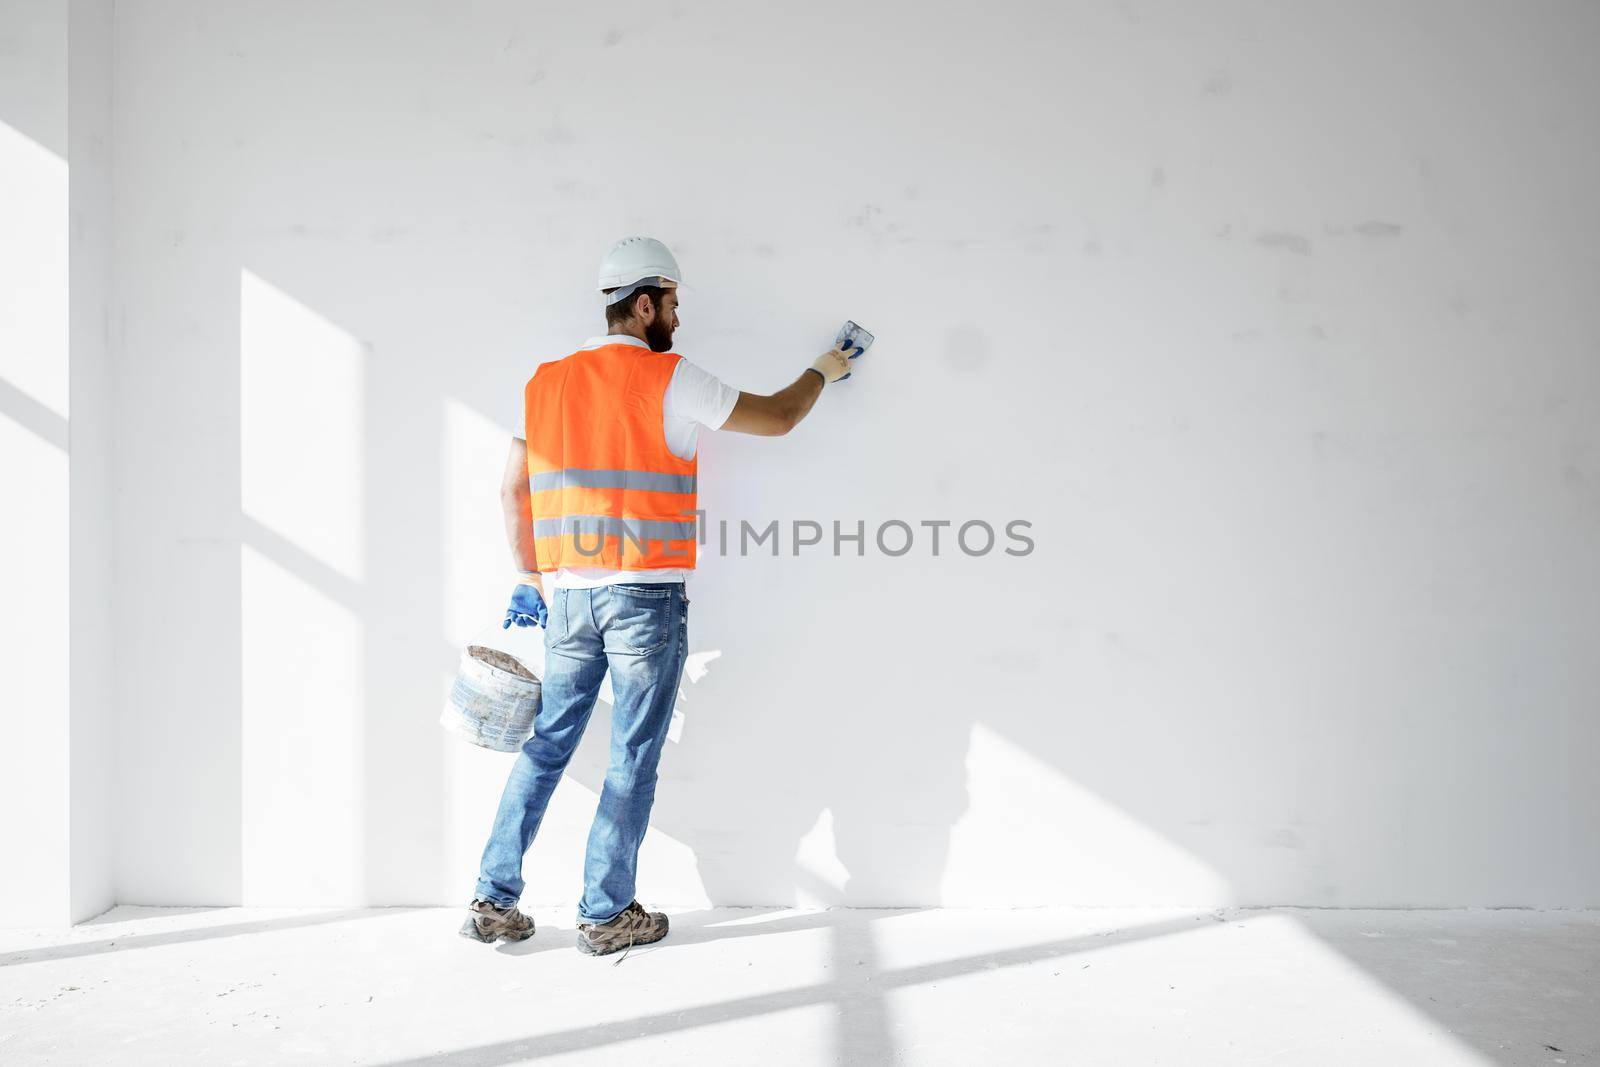 Plasterer in workwear smoothing wall surface of building indoors by Fabrikasimf